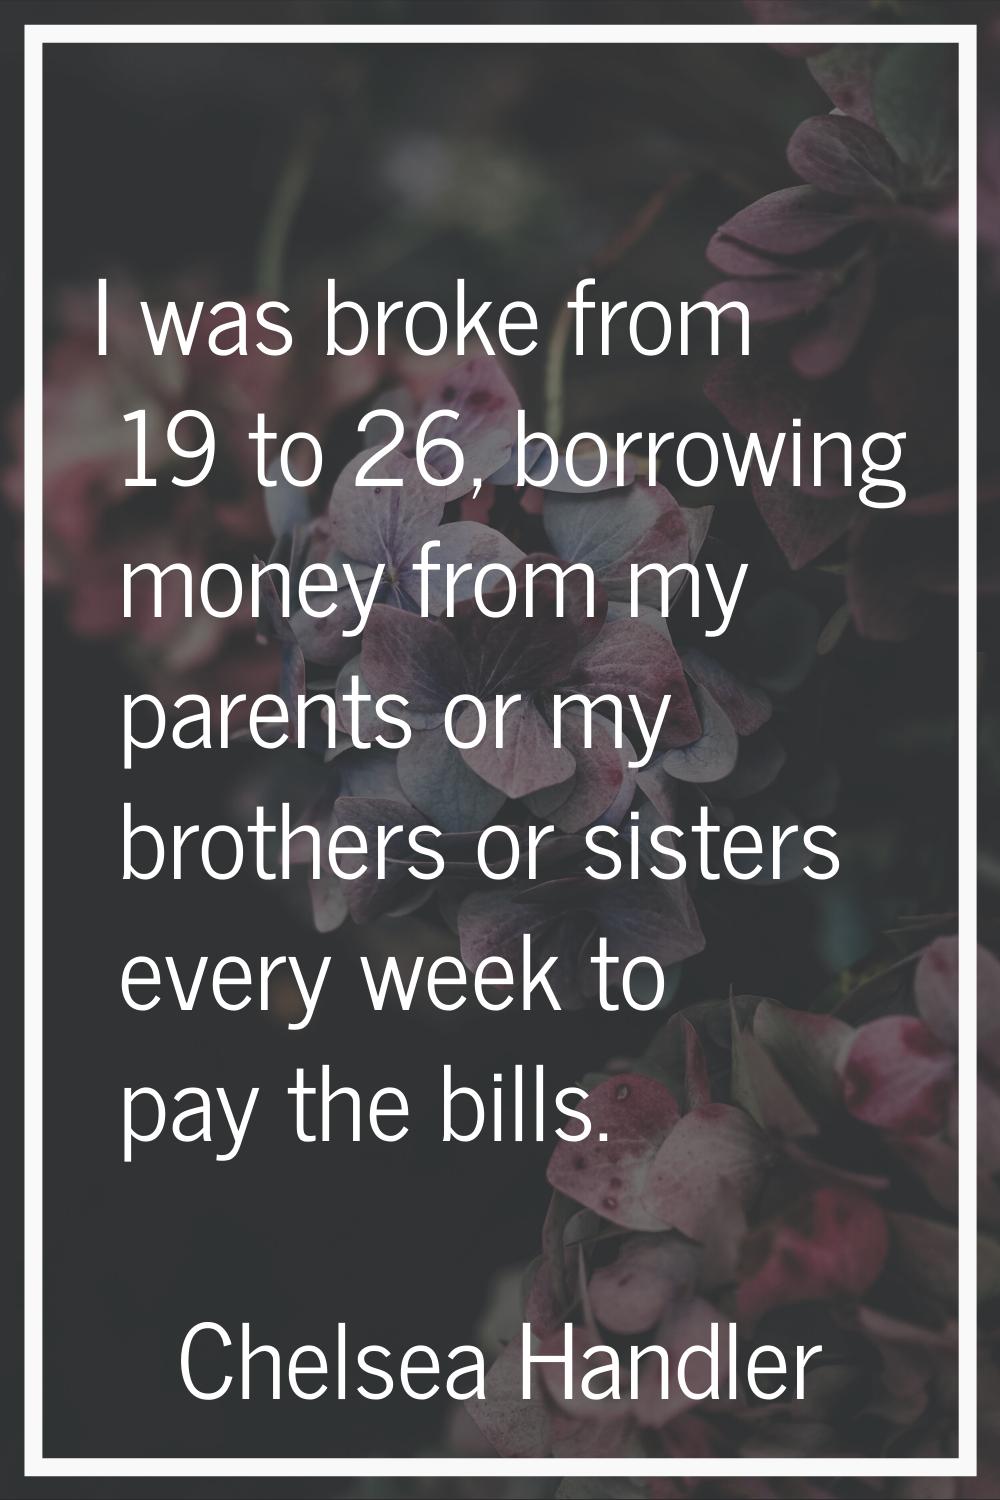 I was broke from 19 to 26, borrowing money from my parents or my brothers or sisters every week to 